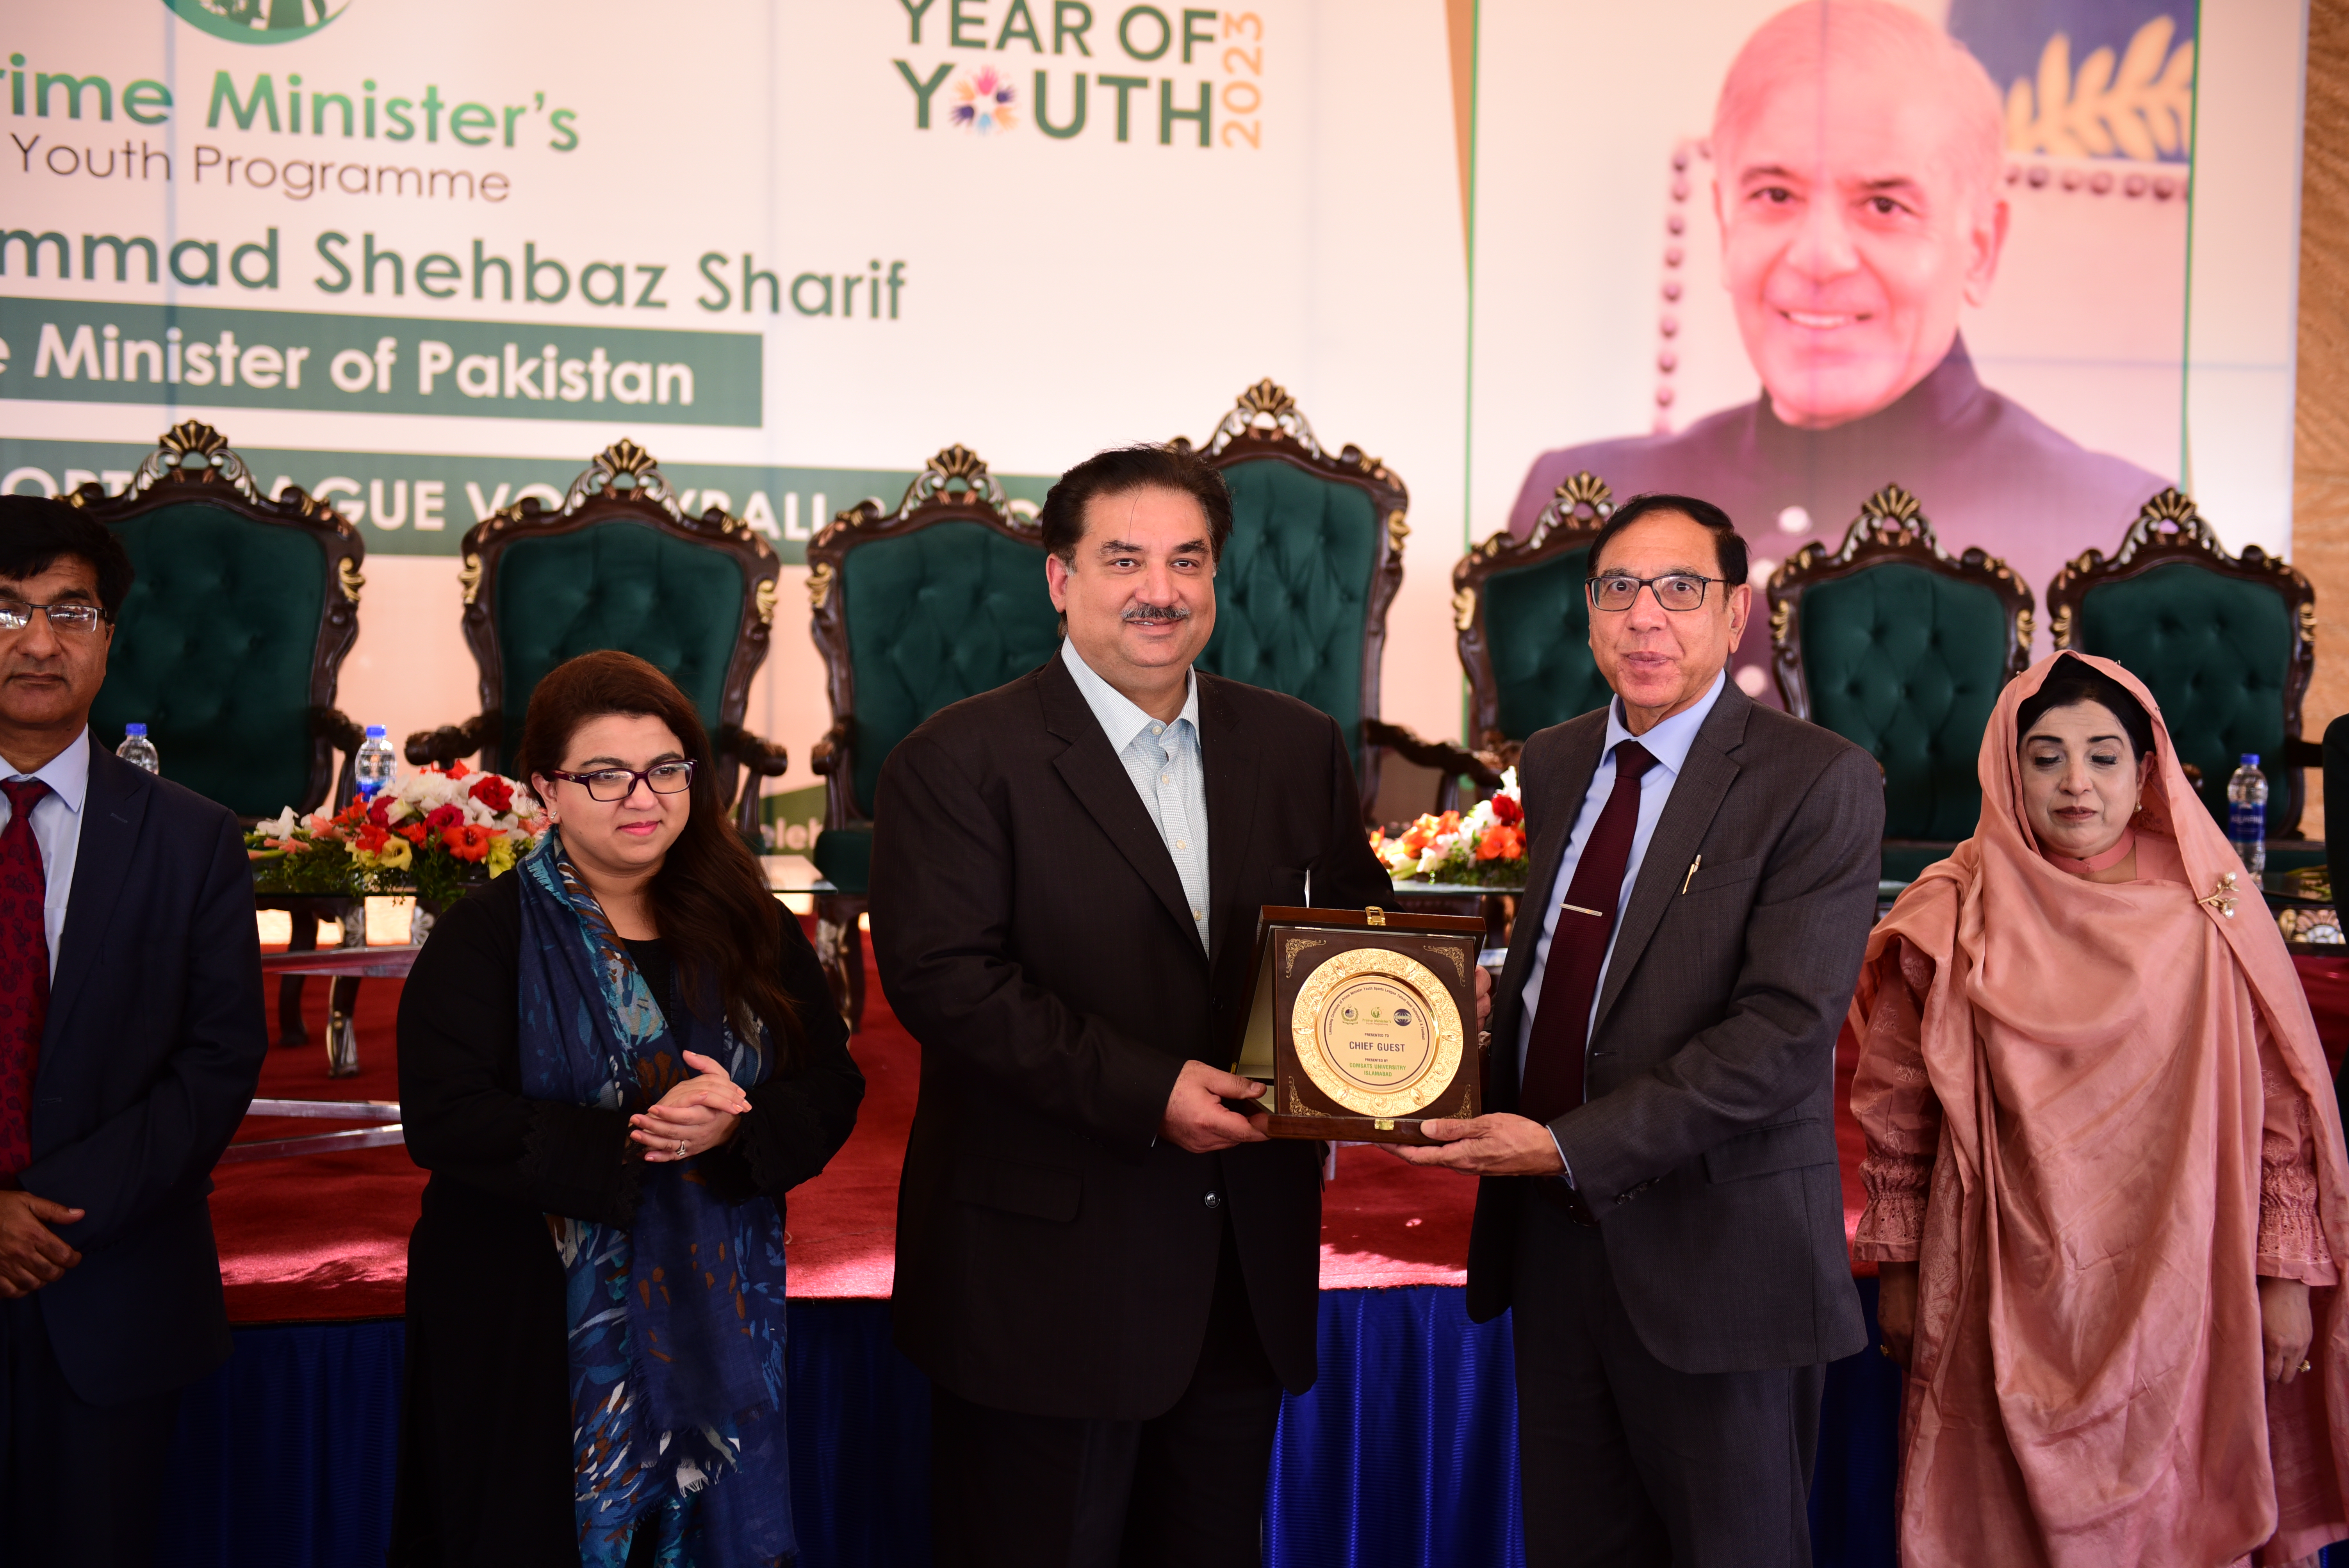 During the "Week of Youth" organized under the Prime Minister's Youth Program, the Football and volleyball talent hunt Inauguration ceremony has been held at COMSATS University Islamabad.

